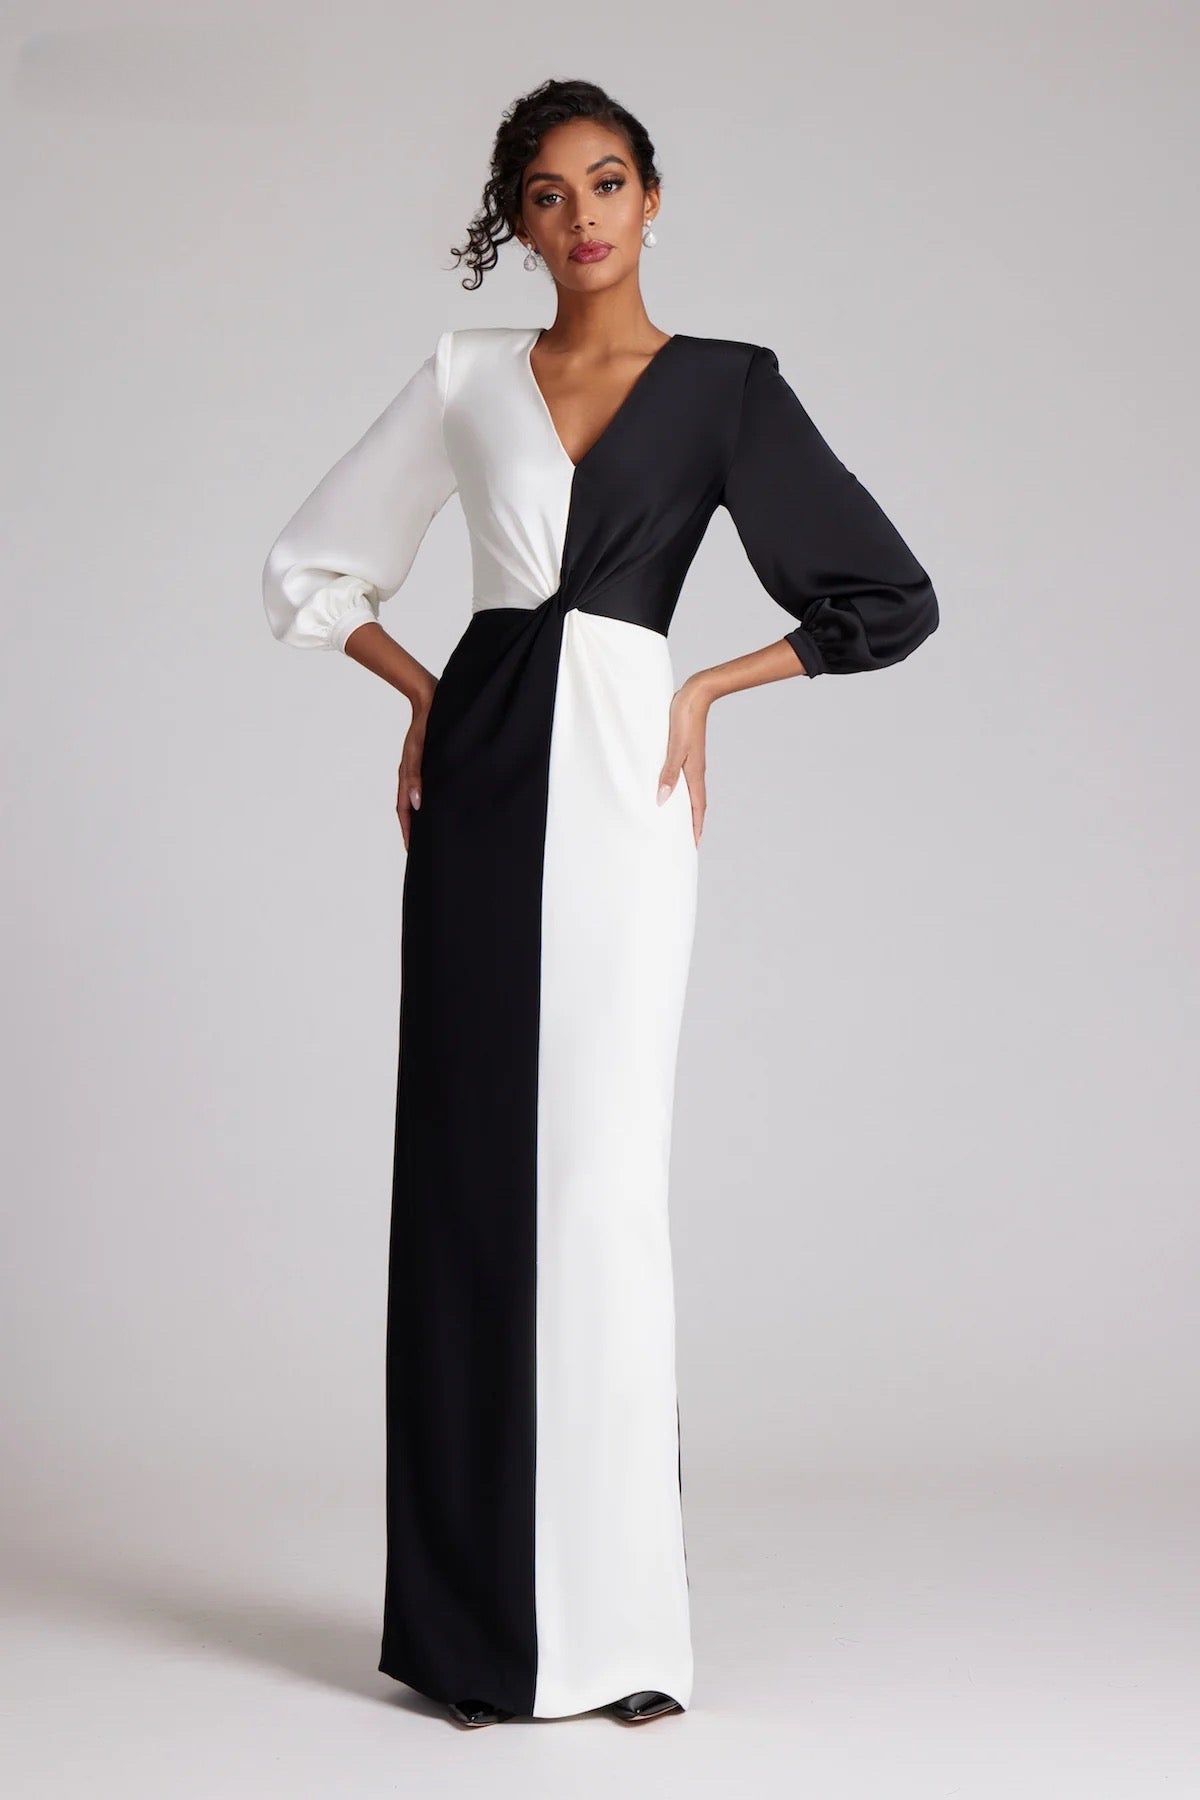 Teri Jon Style 237038 - A classic straight floor-length gown with long sleeves, v-neckline, and twist draping at the waist, perfect for the Mother of the Bride, Mother of the Groom, or formal black-tie galas.